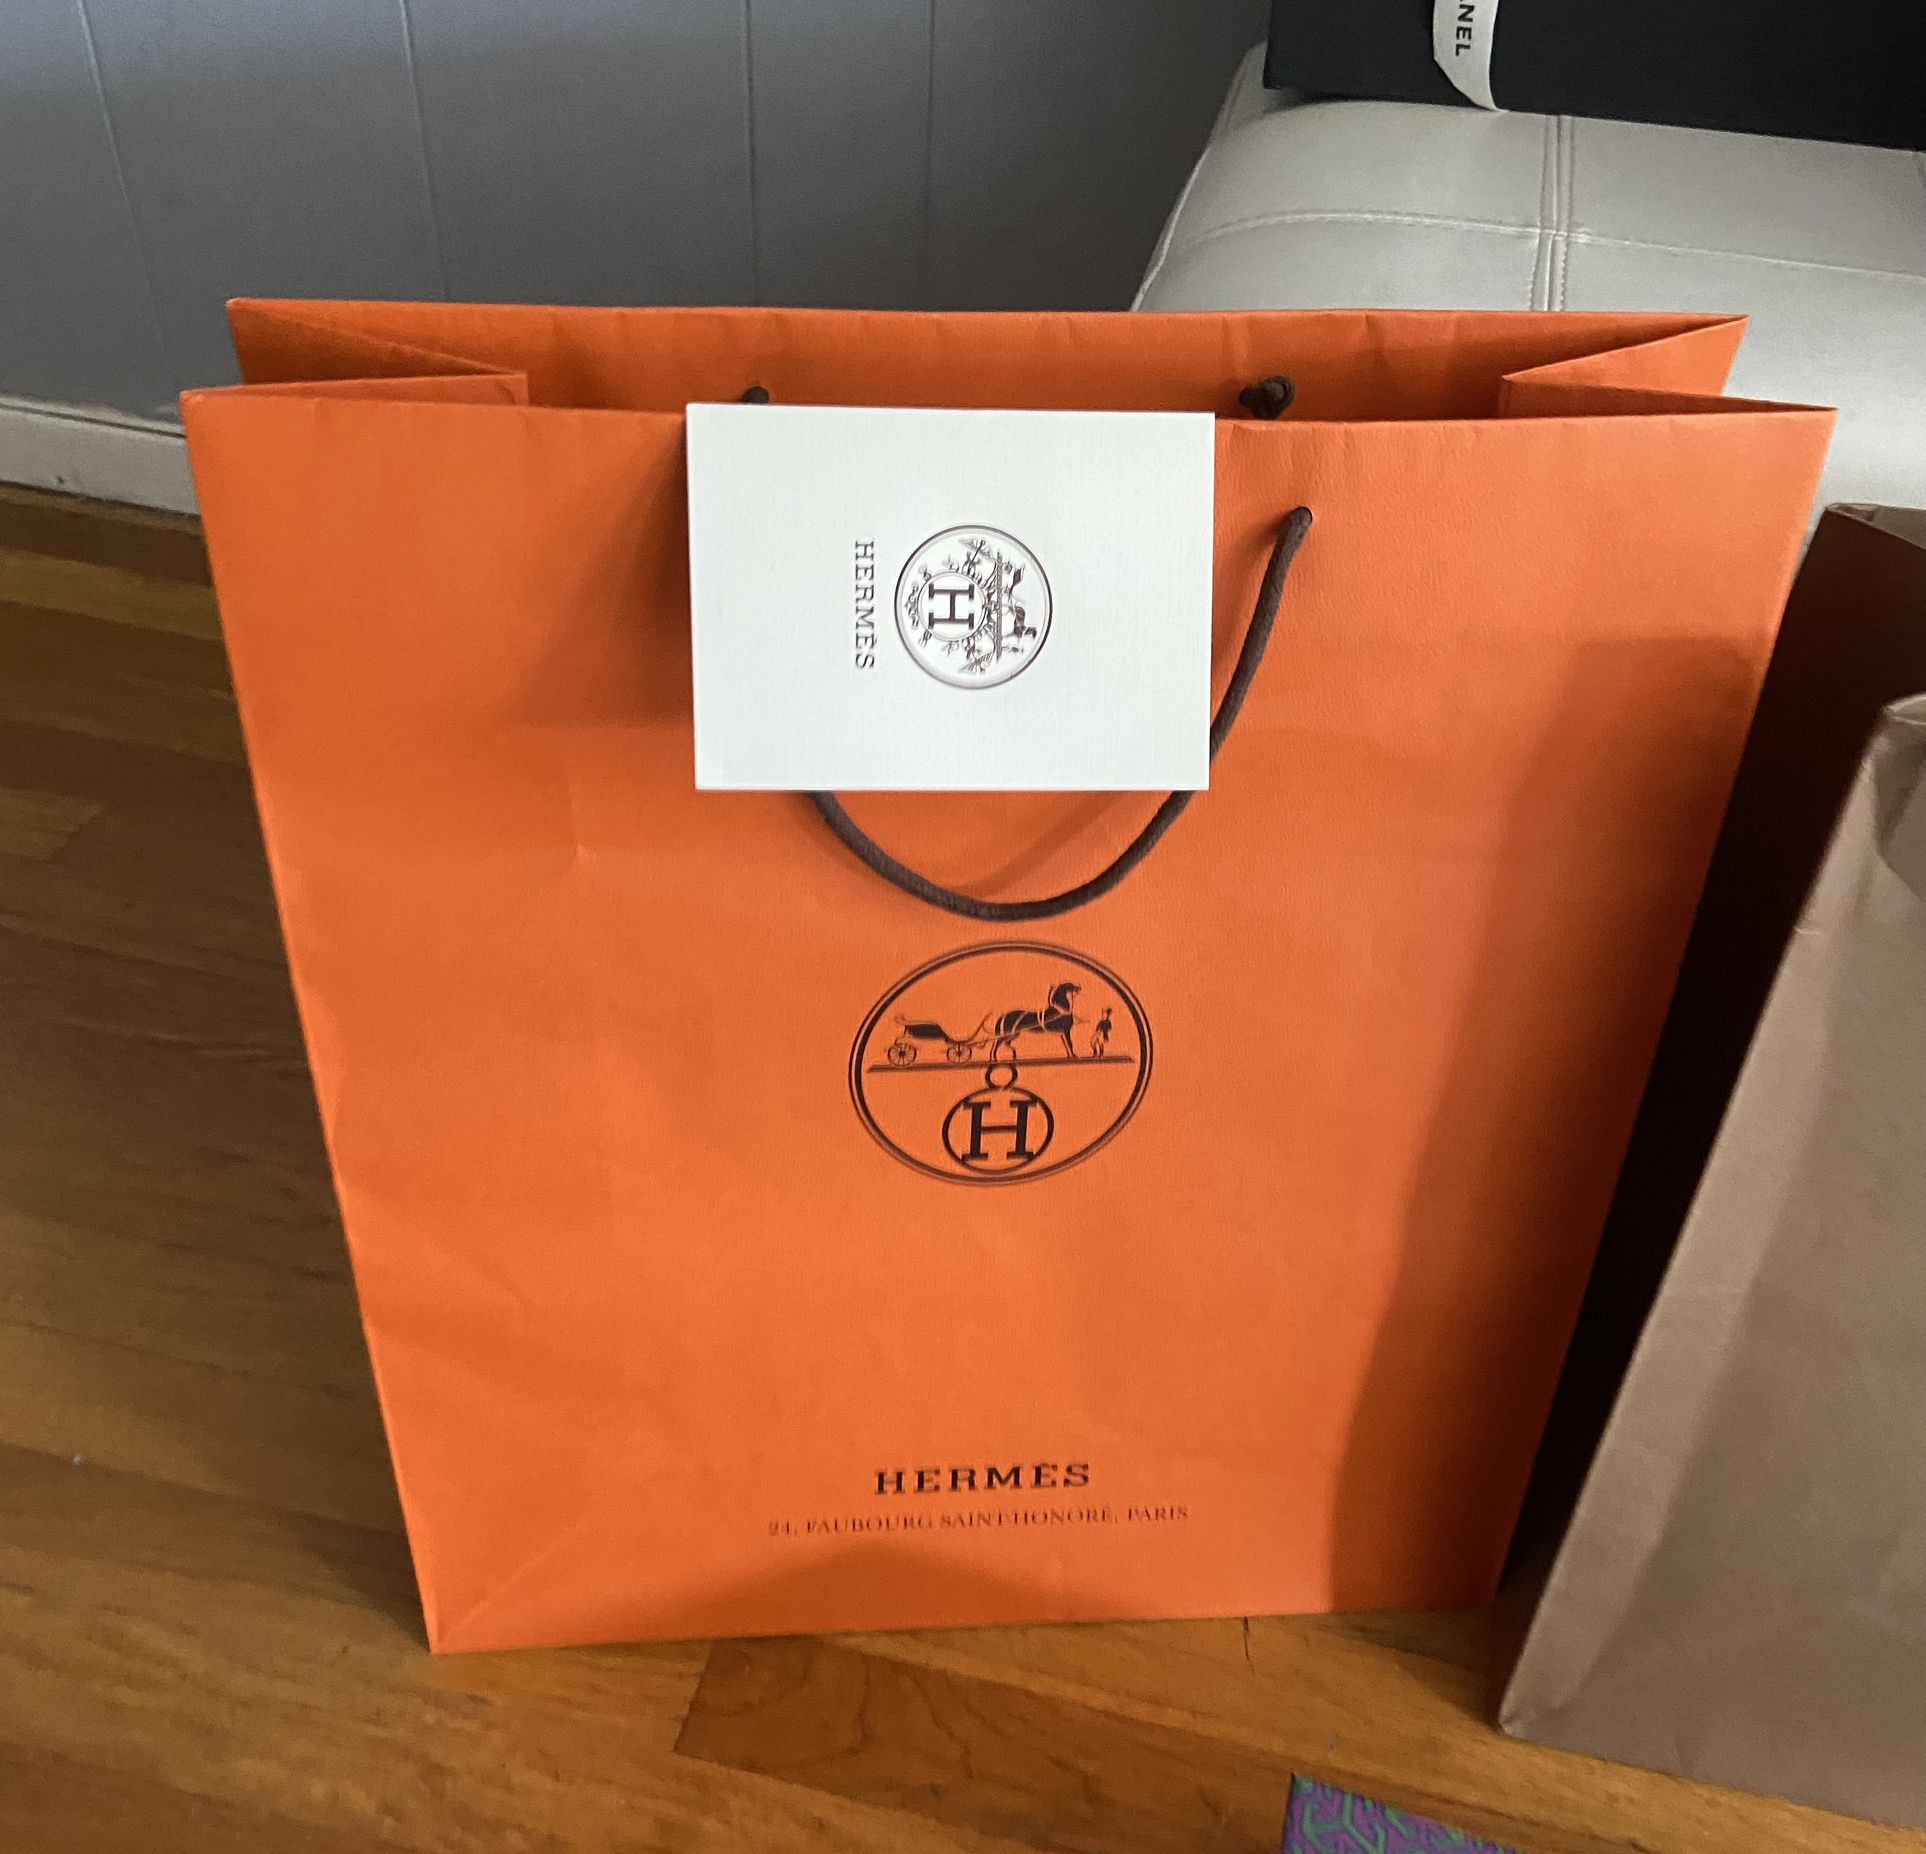 GUCCI LOUIS VUITTON HERMES CHANEL 12 Lot Of Gift Bags for Sale in Queens,  NY - OfferUp